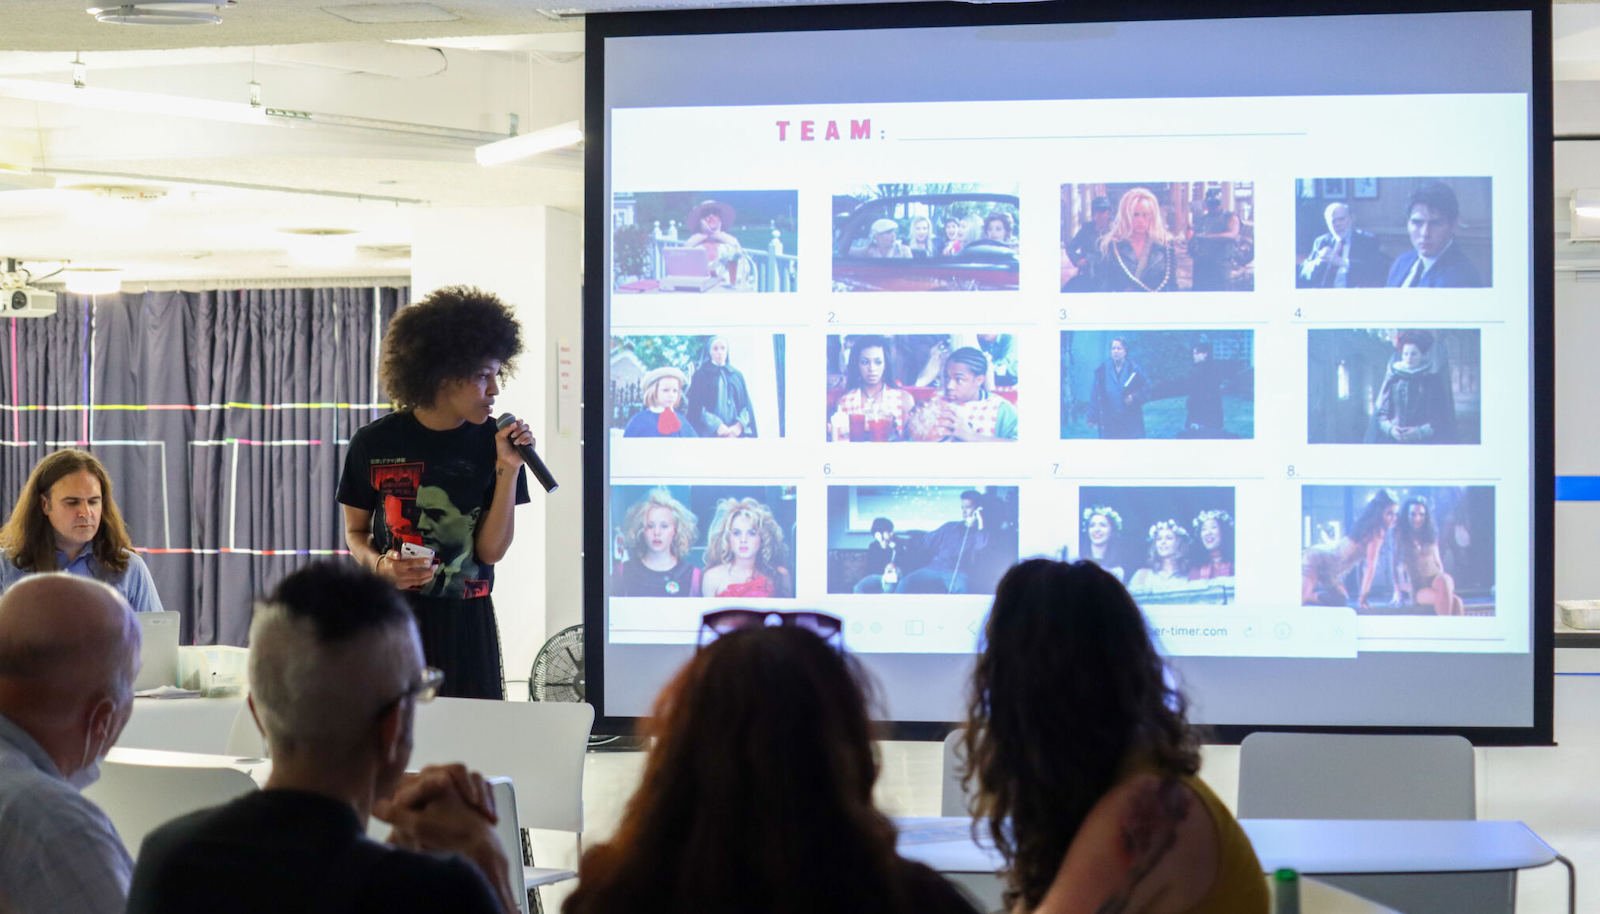 A woman with curly hair speaks into a mic next to large screen showing small boxes of images from films as part of a trivia game; in the front, the backs of participants heads can be seen looking at the screen.